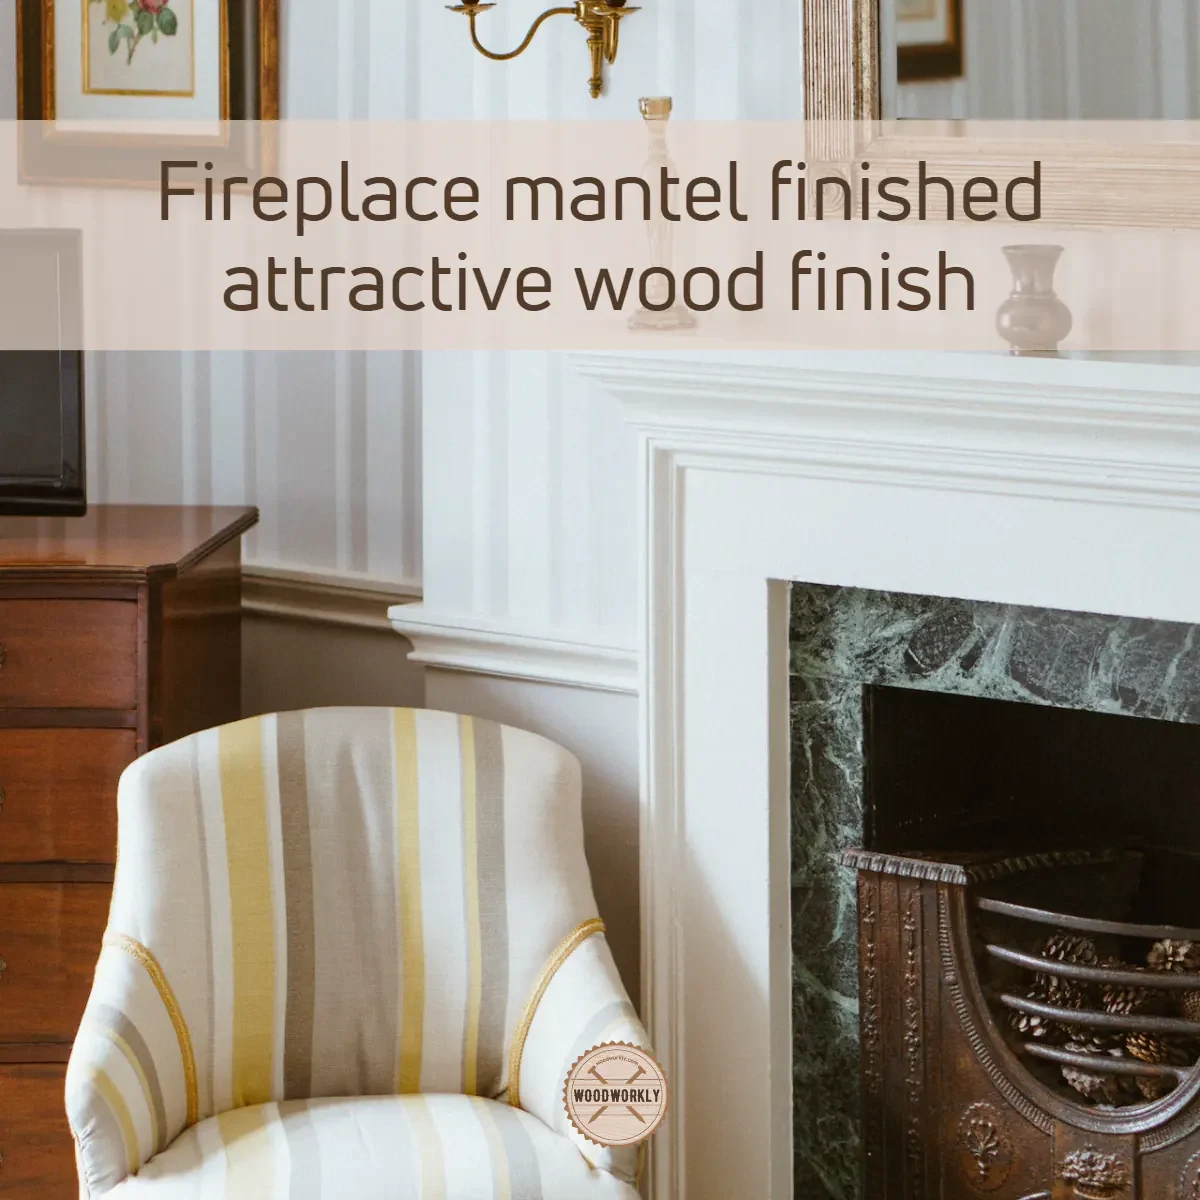 Fireplace mantel finished attractive wood finish